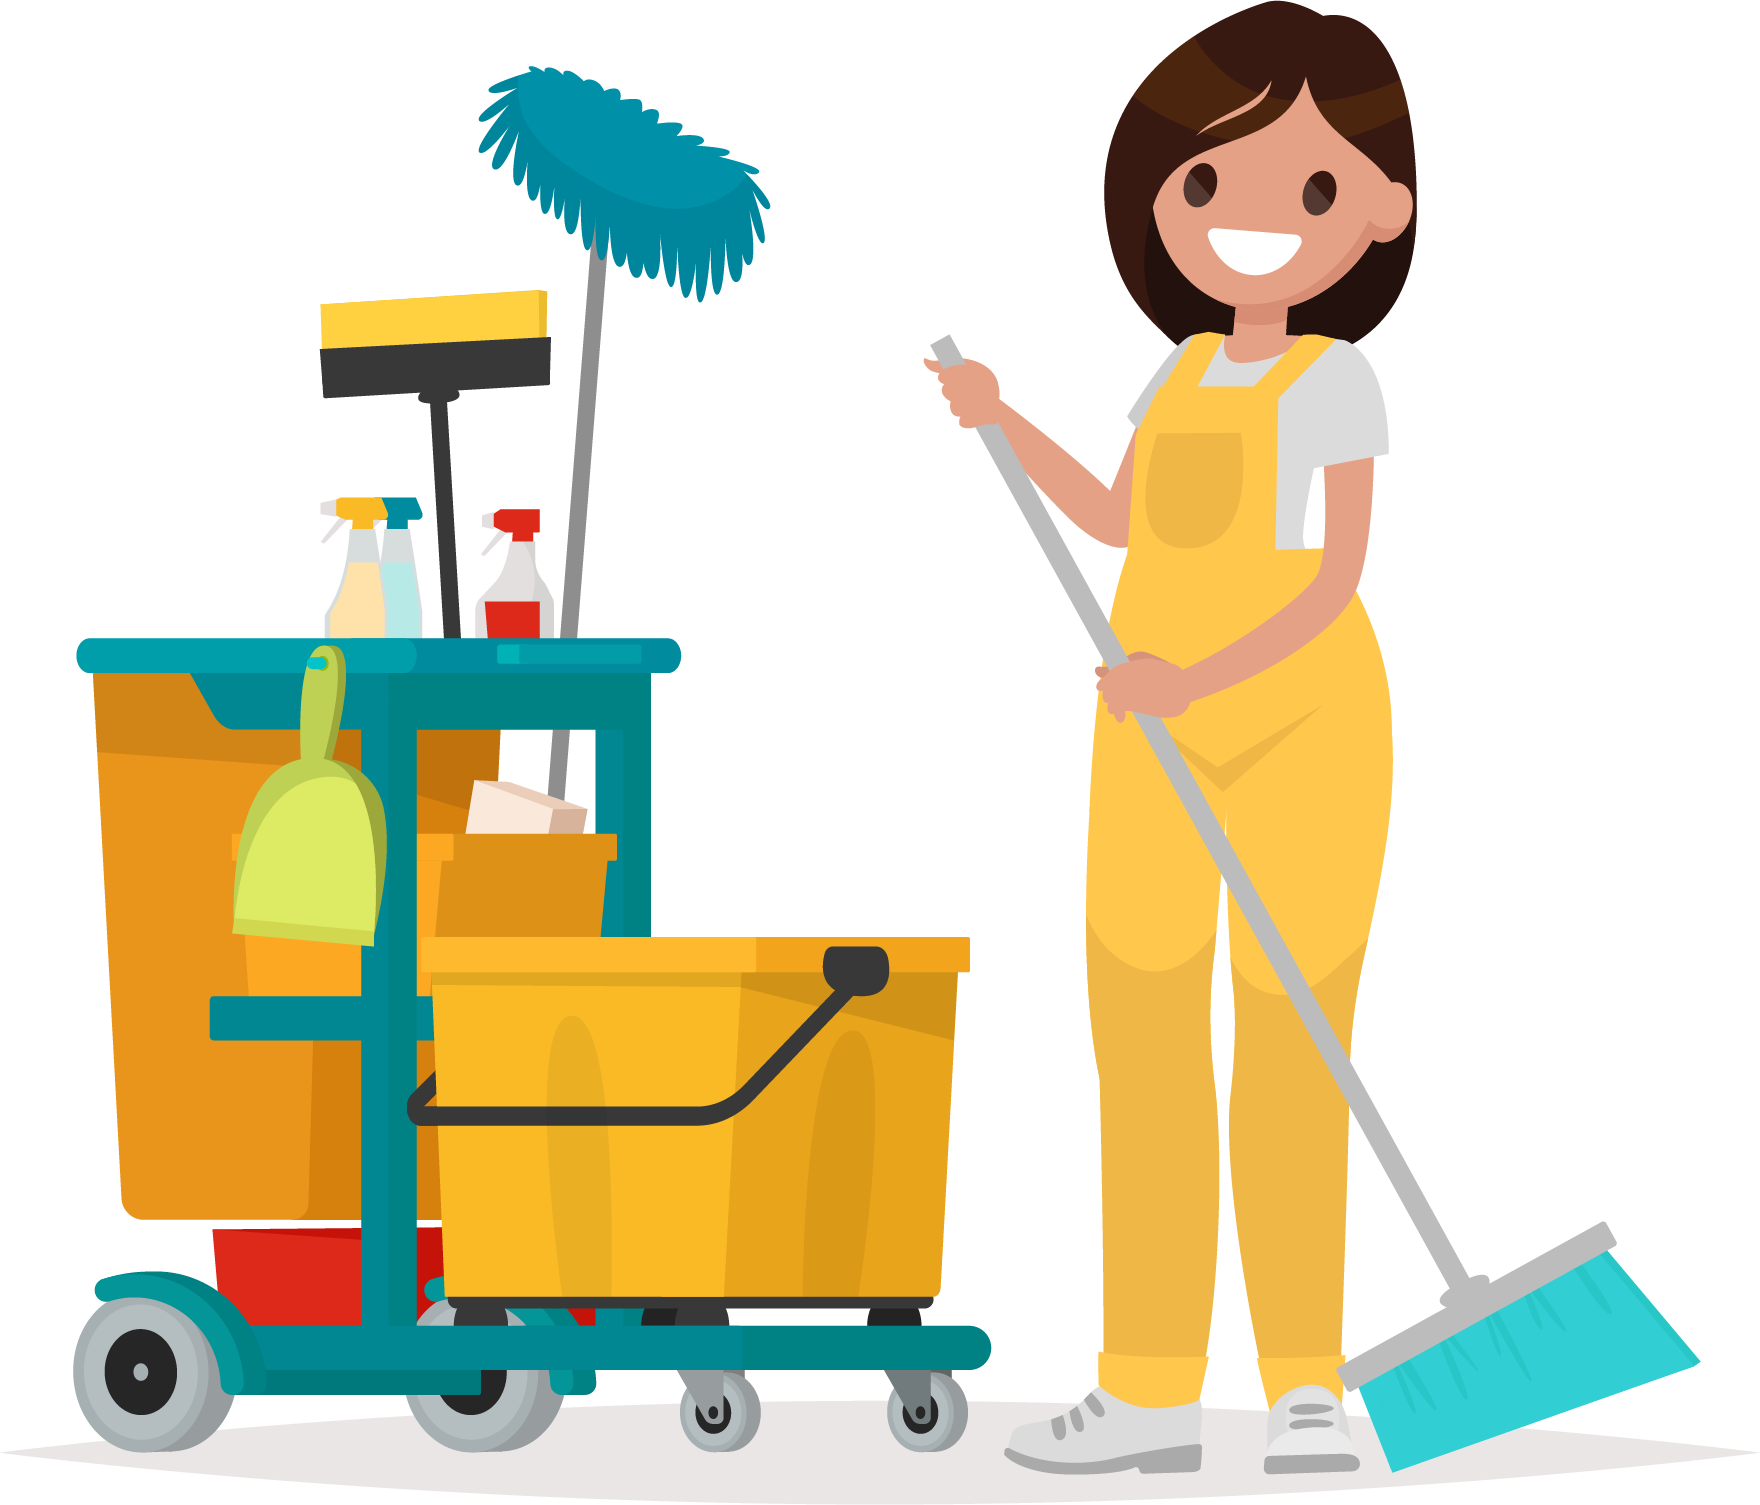 Janitor clipart cleaner, Janitor cleaner Transparent FREE